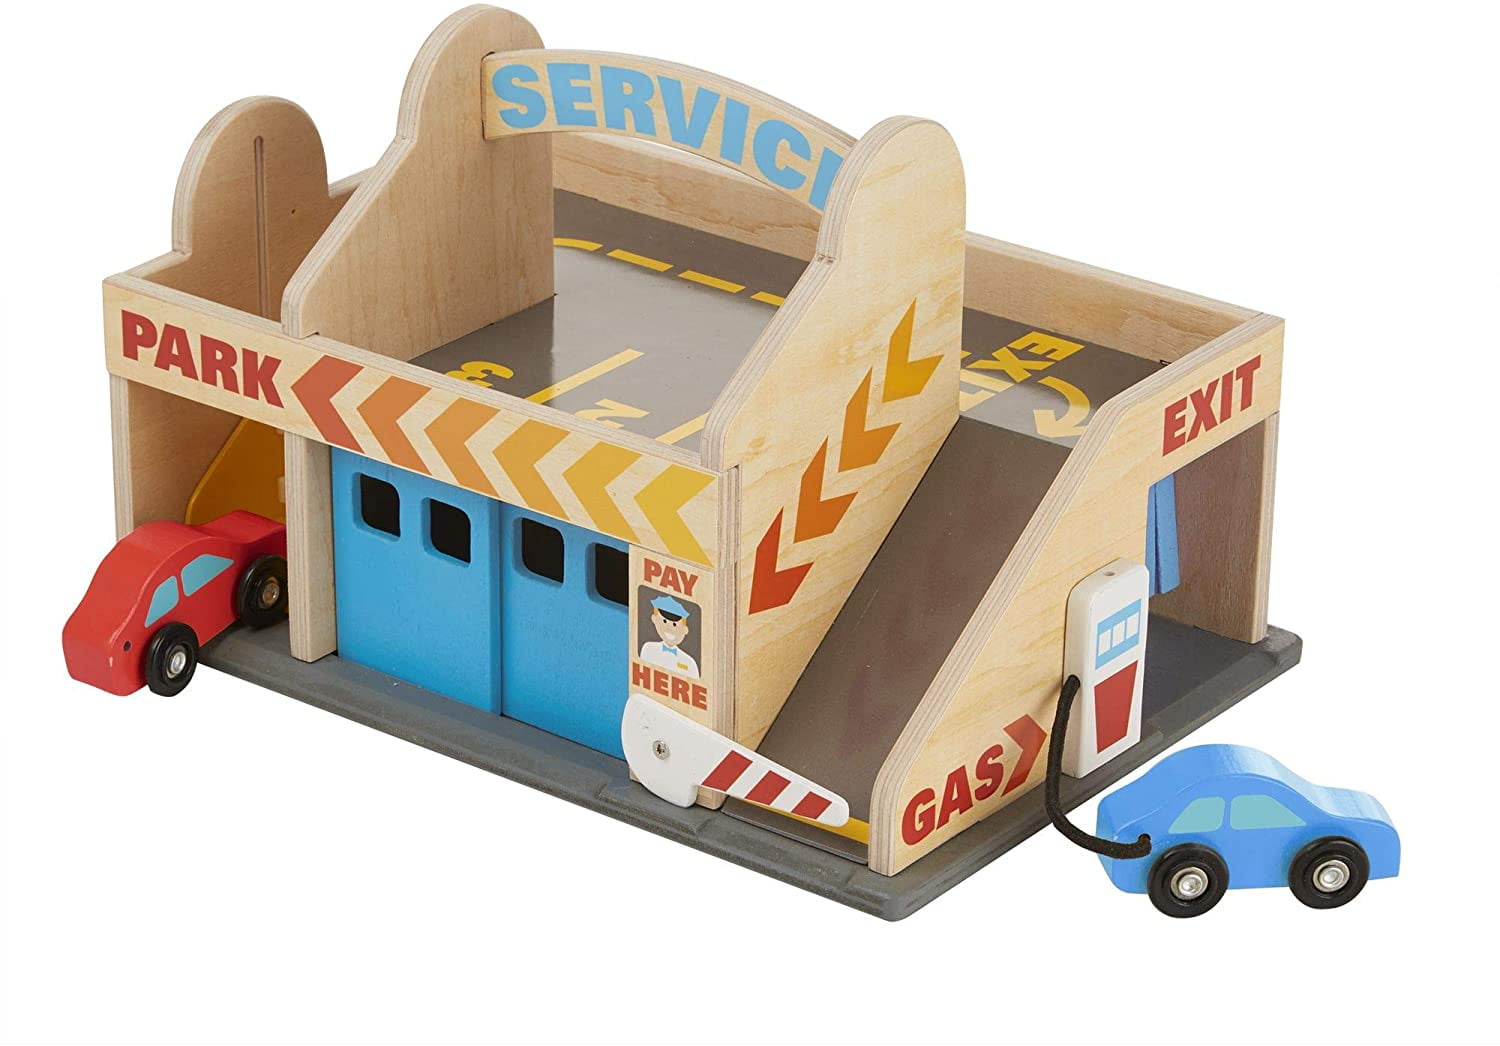 Car Wash Toy Service Station Parking Garage With 2 Wooden Cars Melissa & Doug 